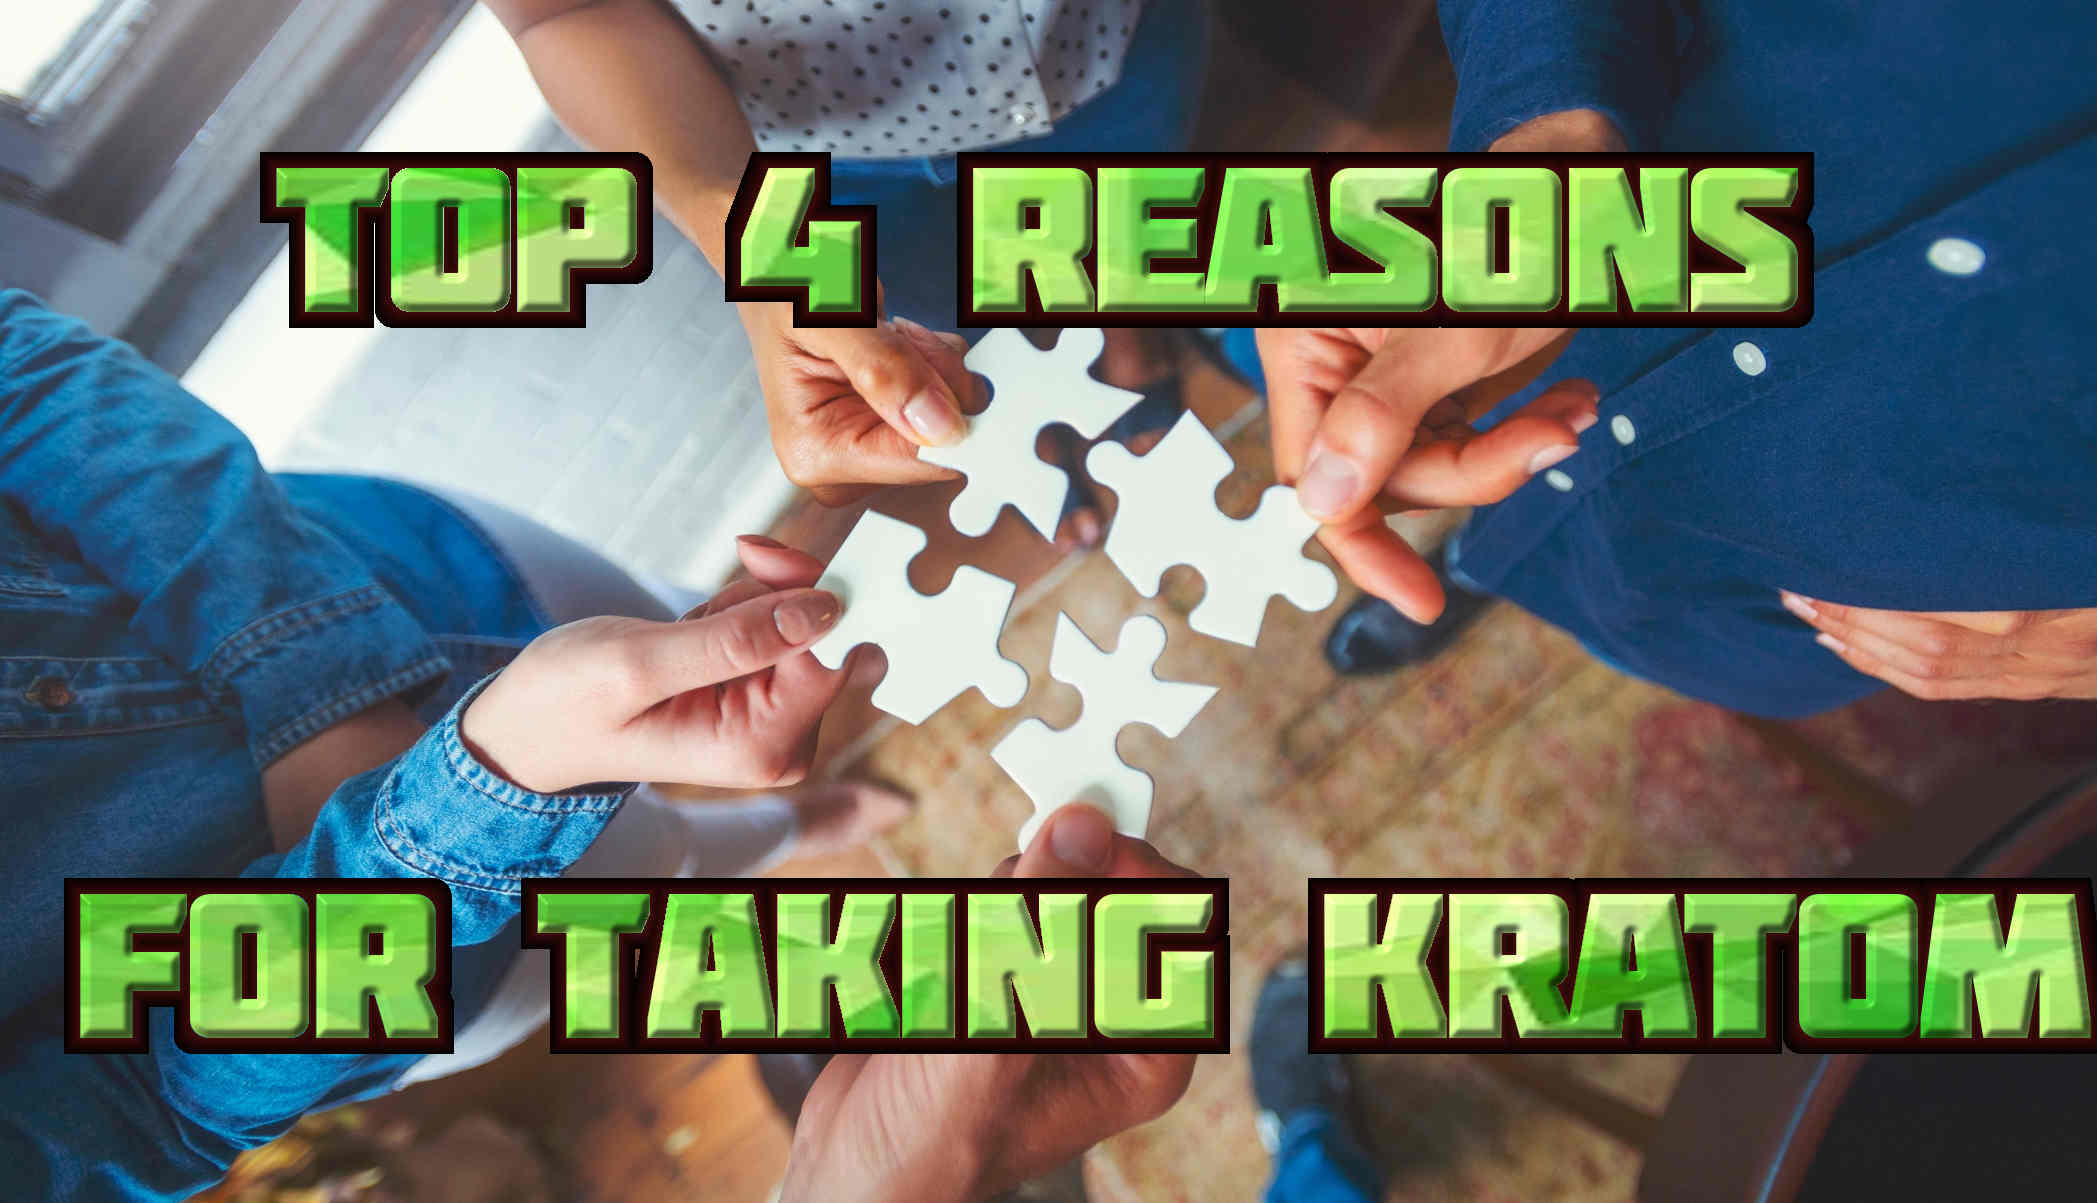 You are currently viewing Top 4 Reasons for Taking Kratom